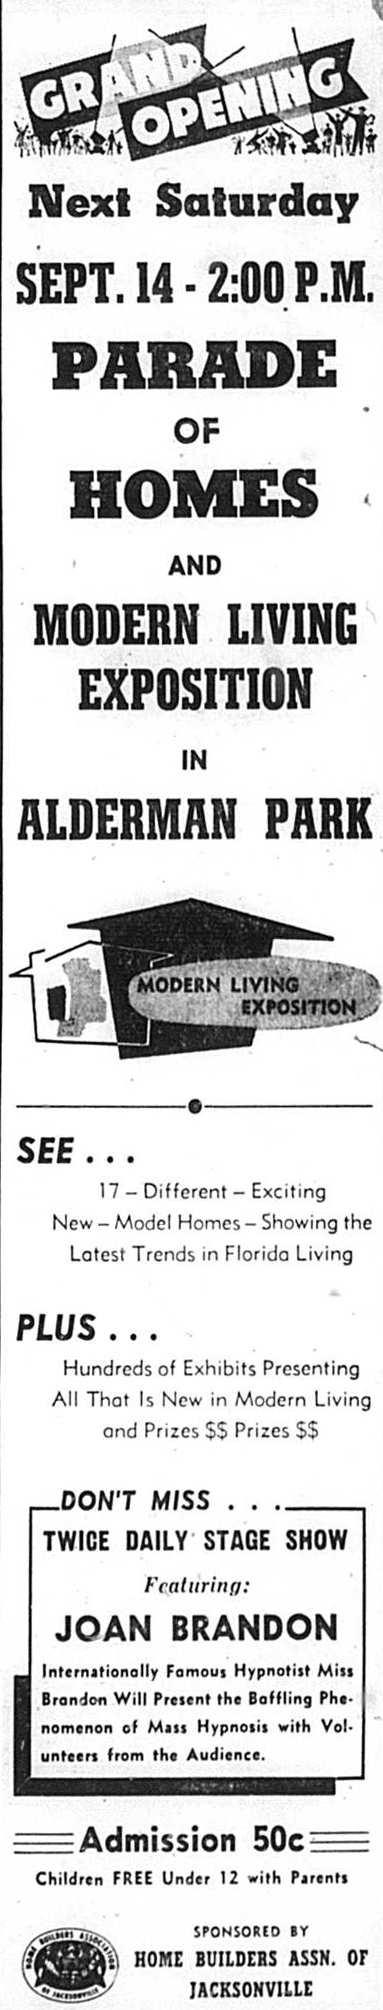 Page 10 The Neighborhoods of Arlington A monthly spotlight on the building blocks of Arlington community Alderman Park The neighborhood known as Alderman Park was developed beginning in early 1955 by